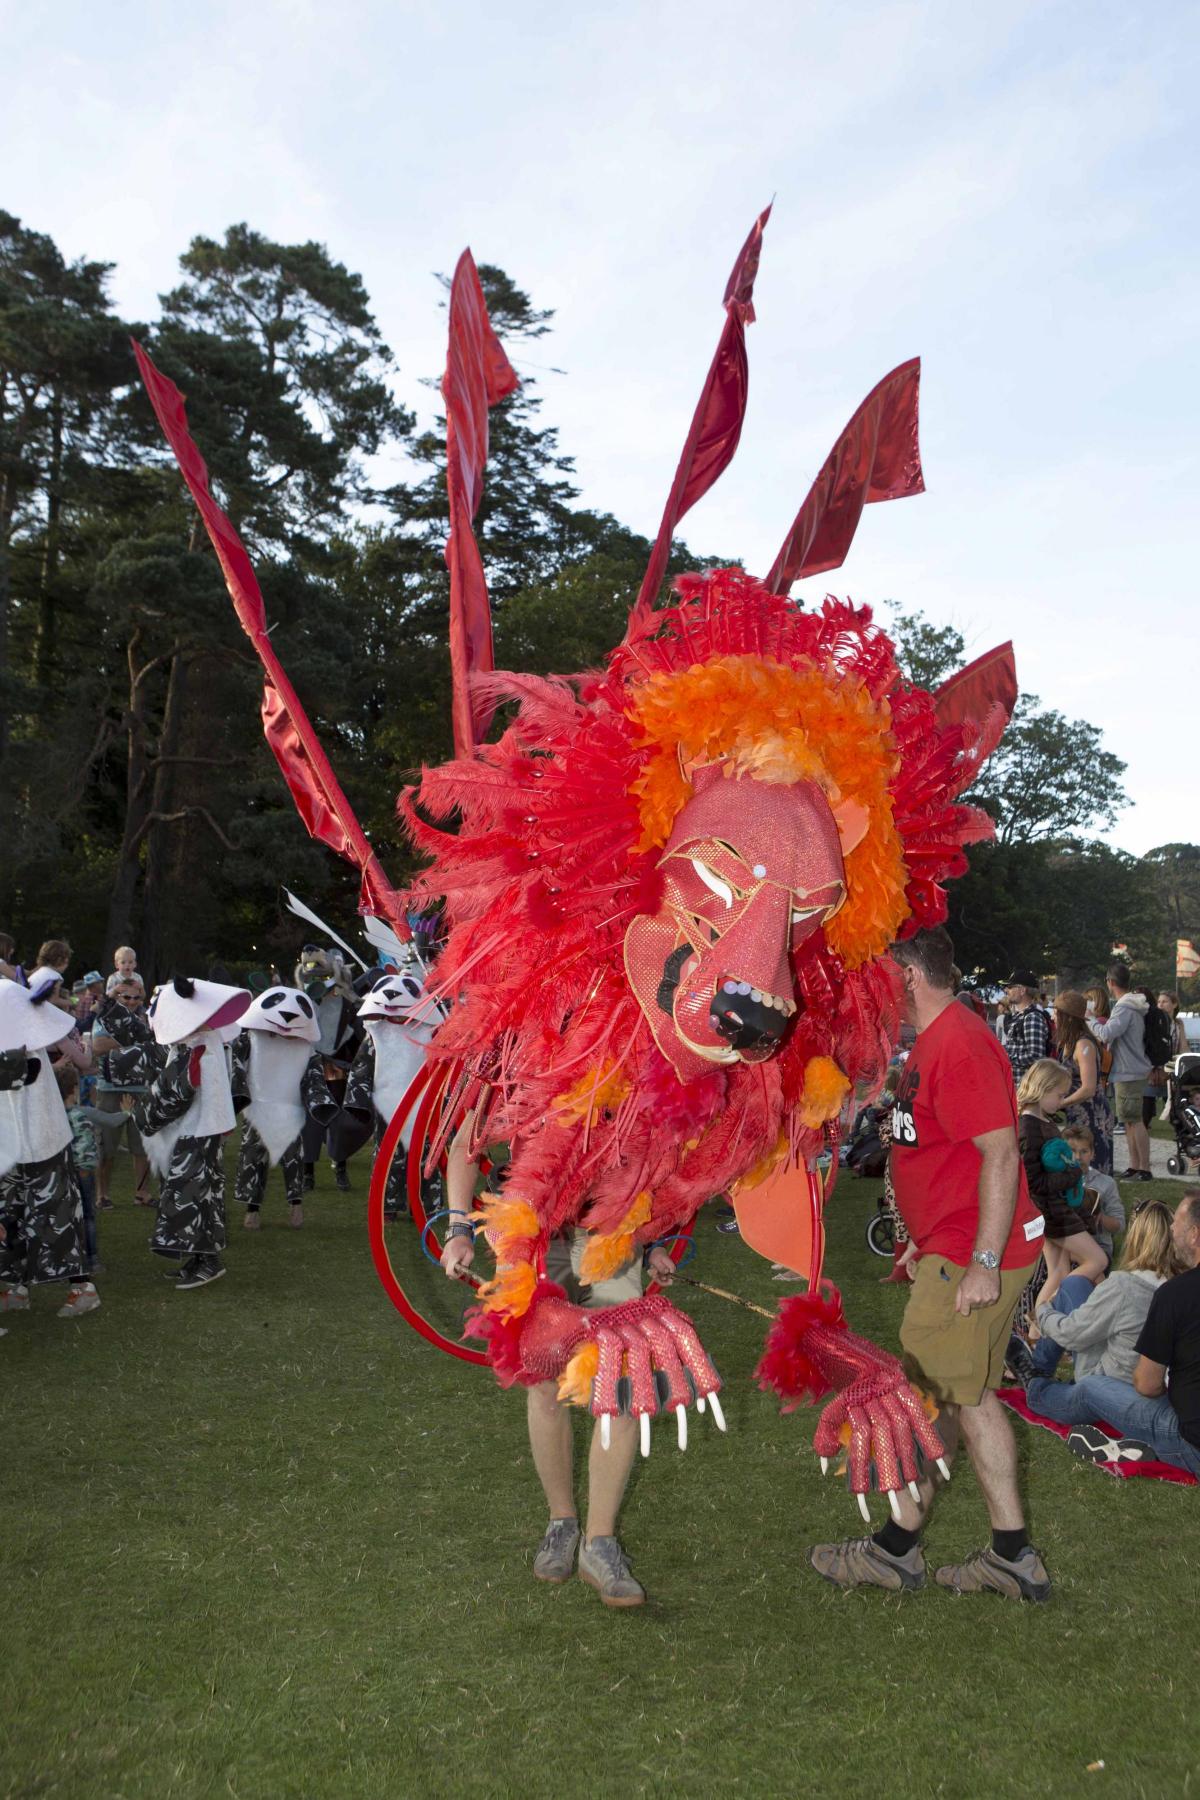 Camp Bestival 2015 - Images by Rock Star Images